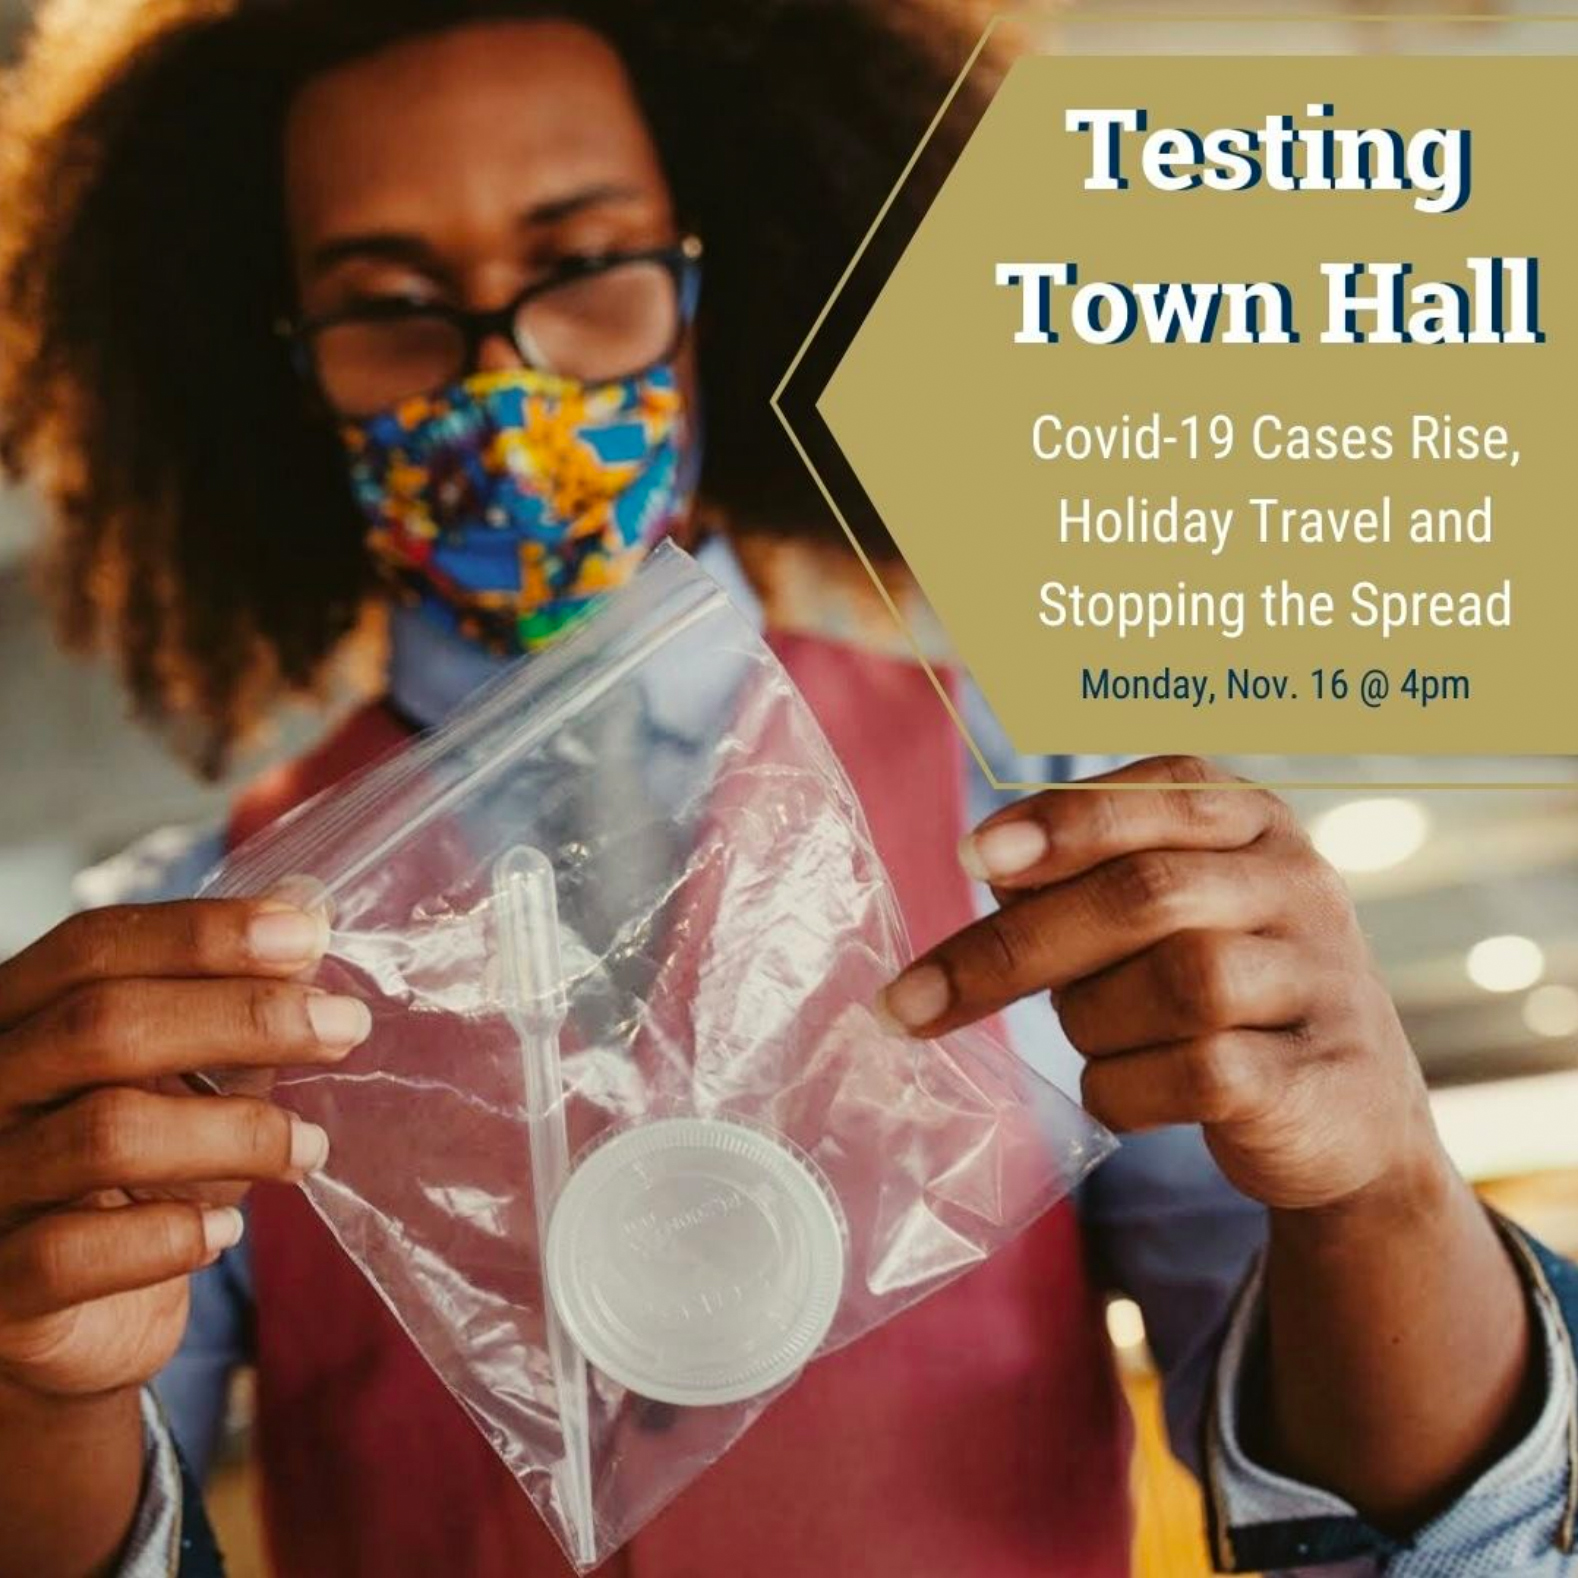 Join Joshua Weitz, Greg Gibson, JulieAnne Williamson, and Brielle Lonsberry for updates and Q&A on Georgia Tech's Campus Surveillance Testing efforts.